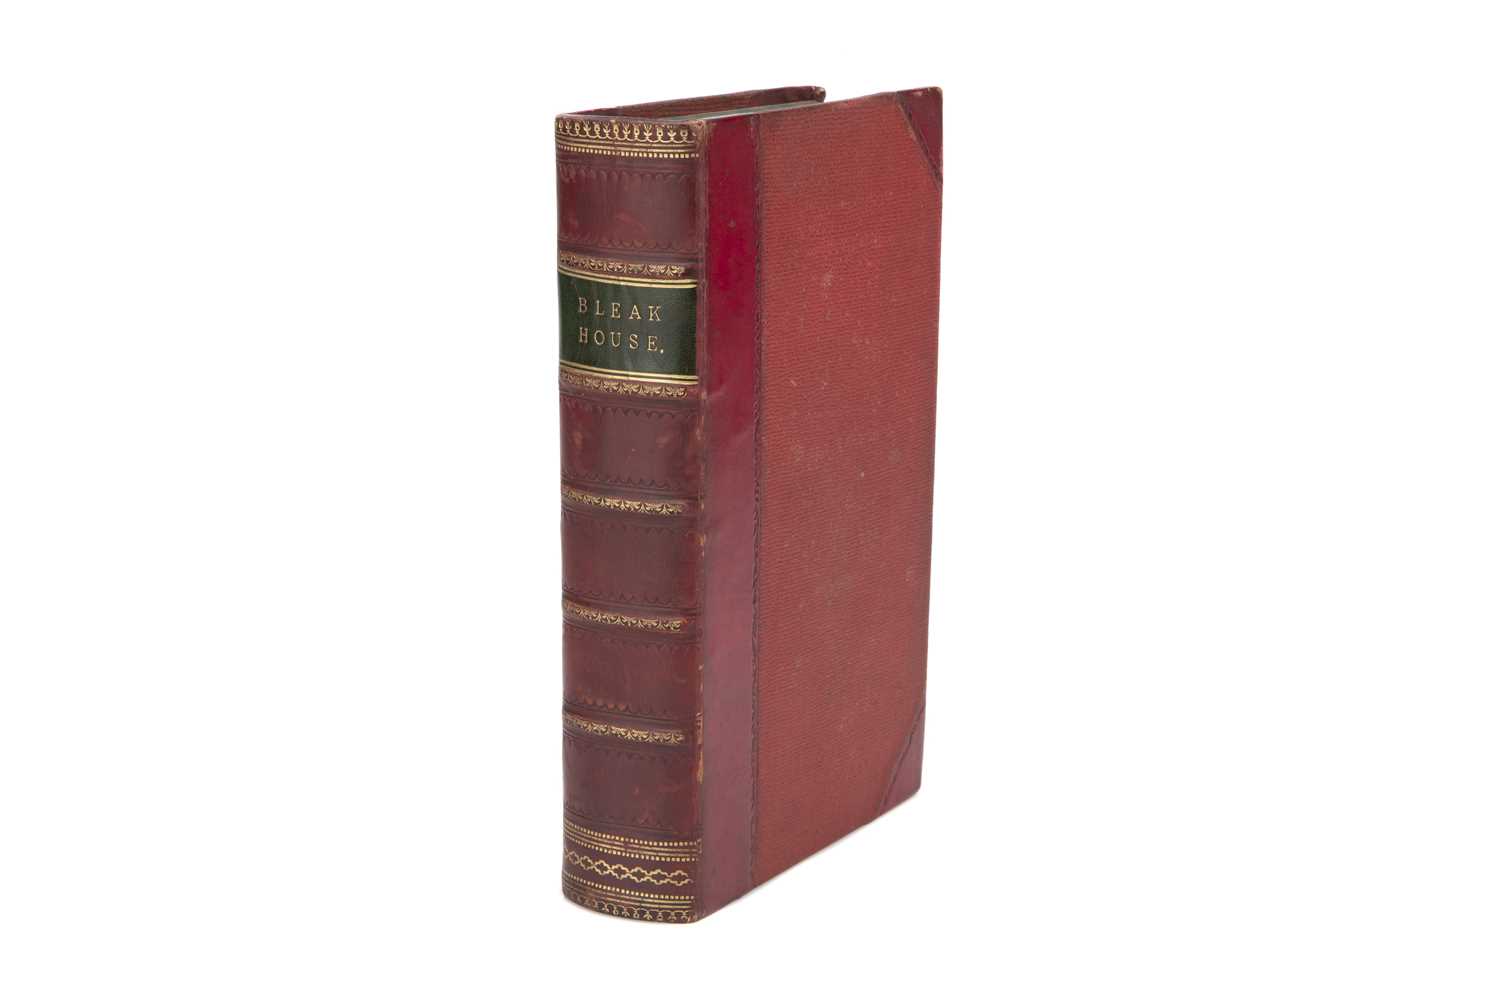 Lot 32 - DICKENS, Charles, Bleak House, First Bound Edition